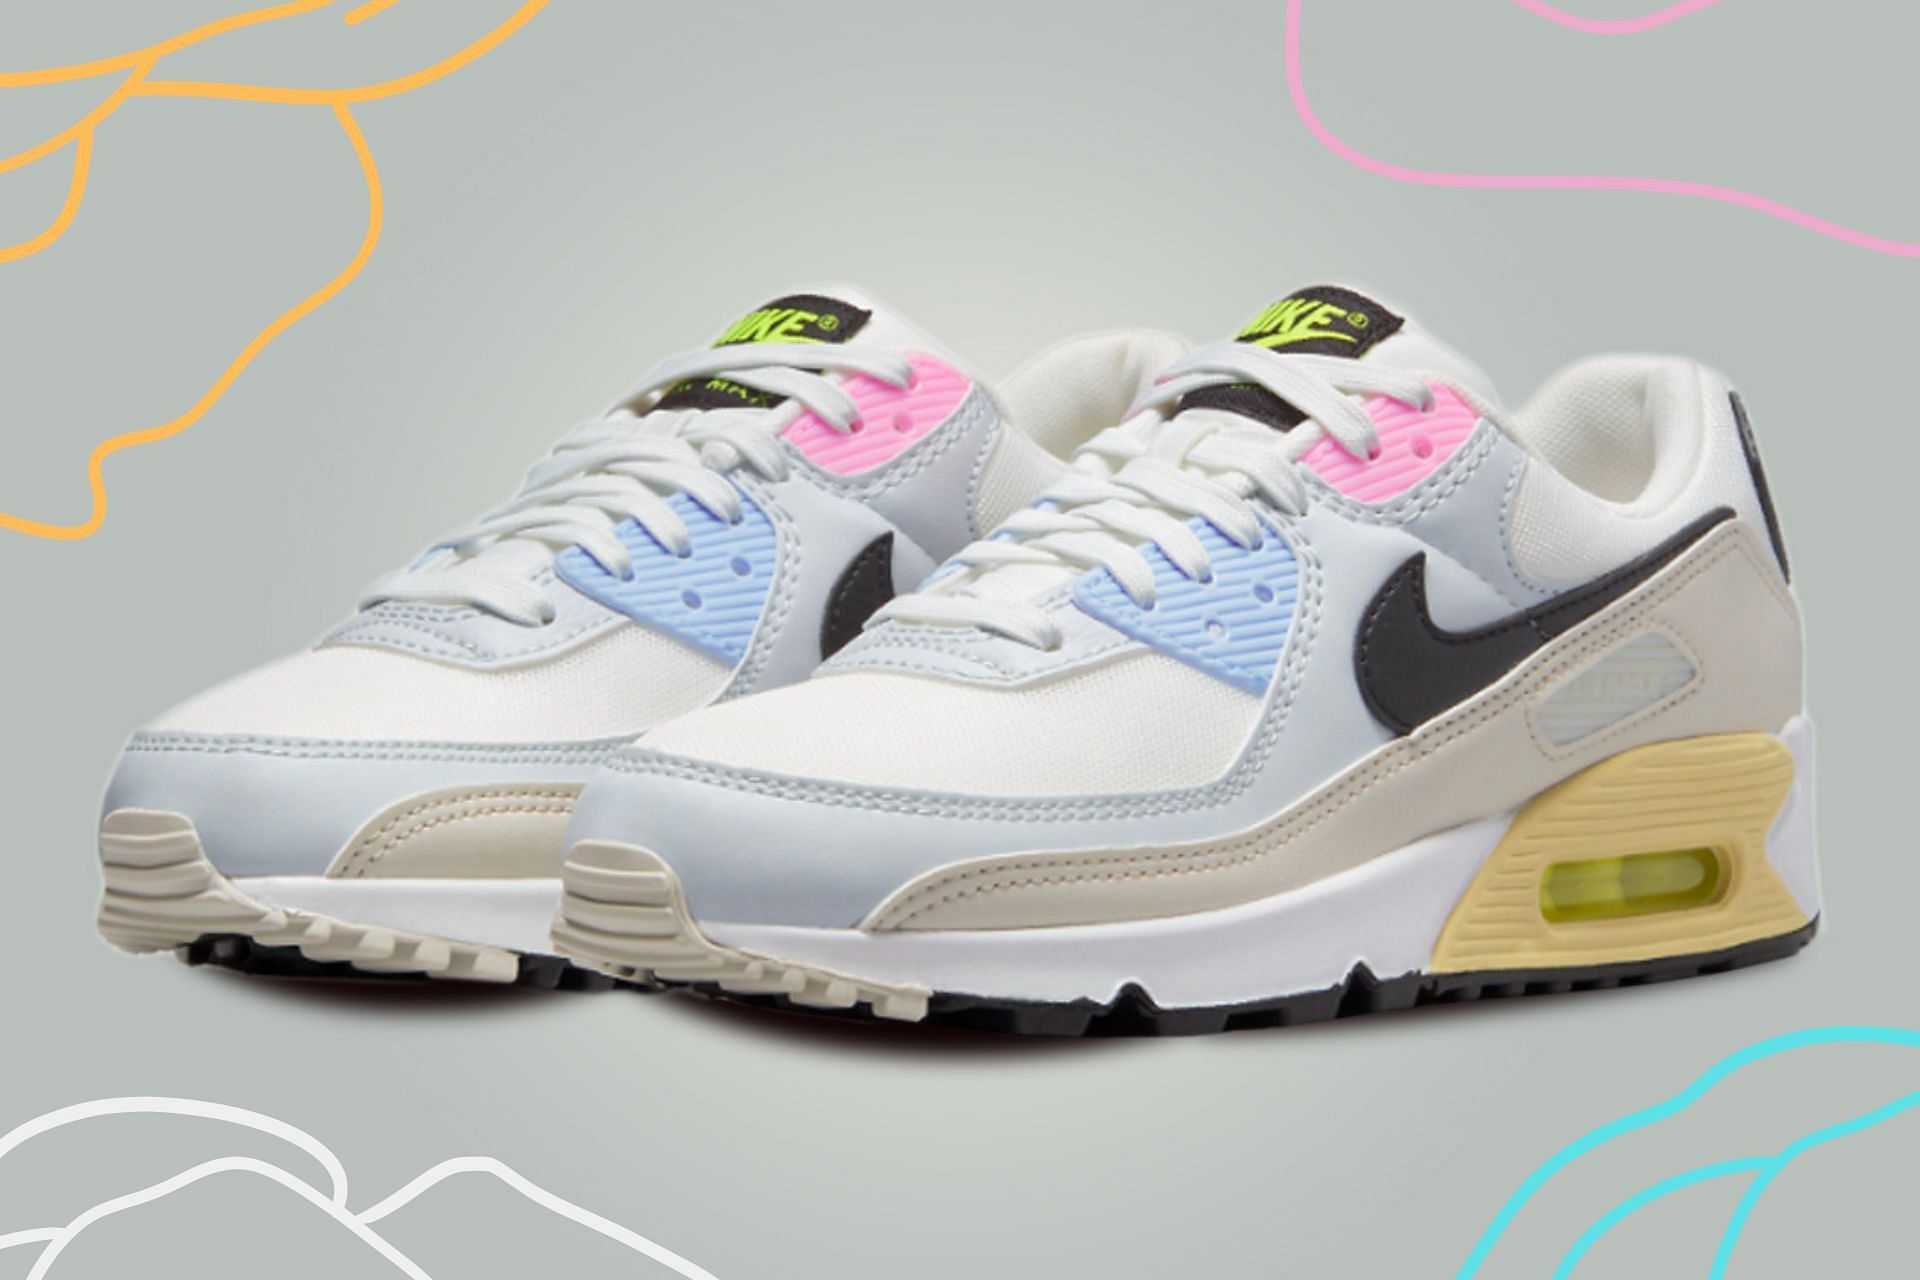 Christchurch veredicto Ridículo Nike Air Max 90 Multi "Summit White Light Bone" sneakers: Where to buy,  price, release date, and more explored